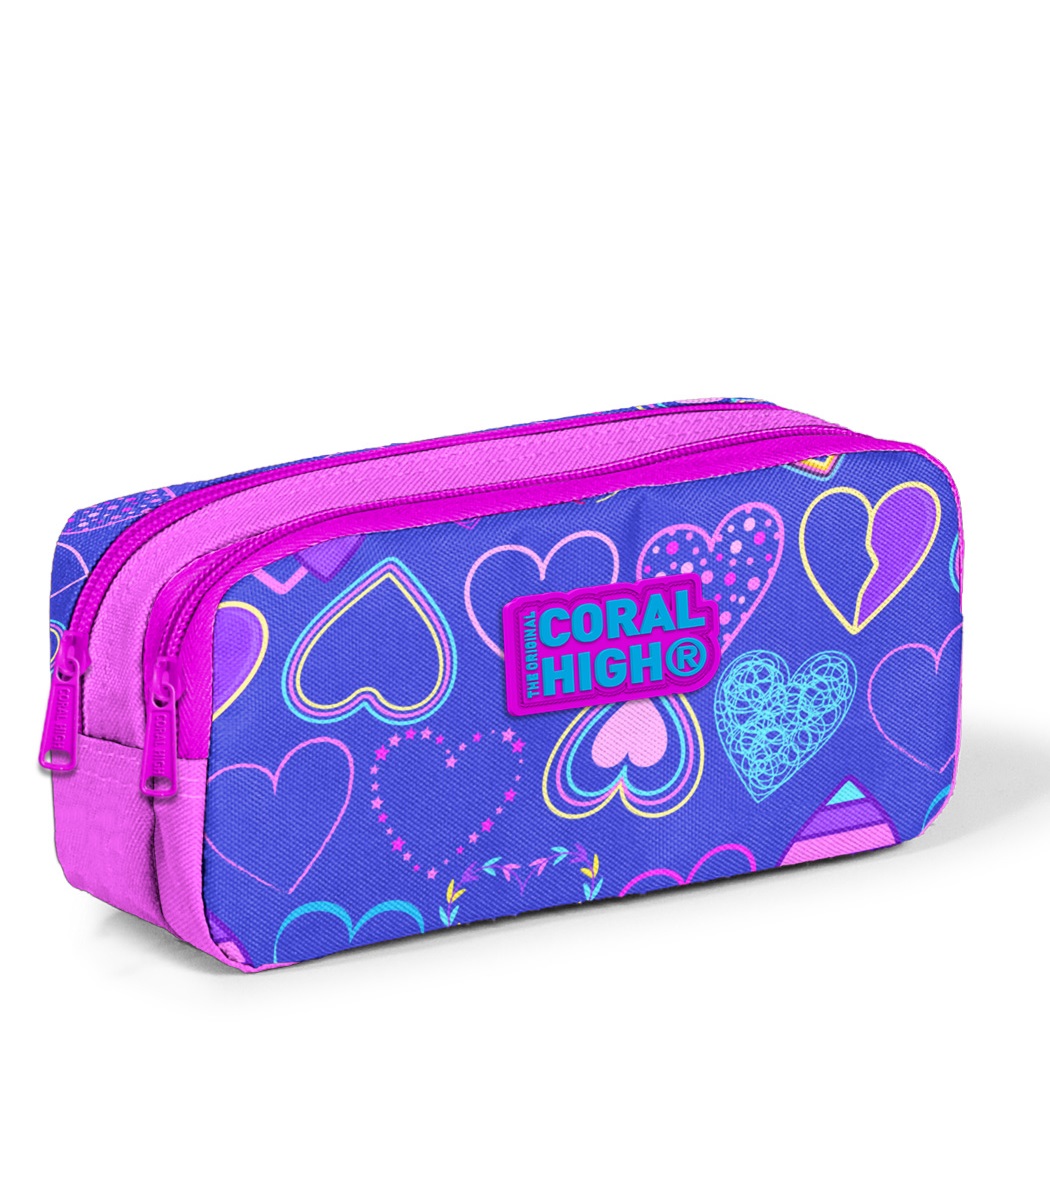 Coral High Kids Two Compartment Pencil case - Light Pink Lavender Heart Patterned